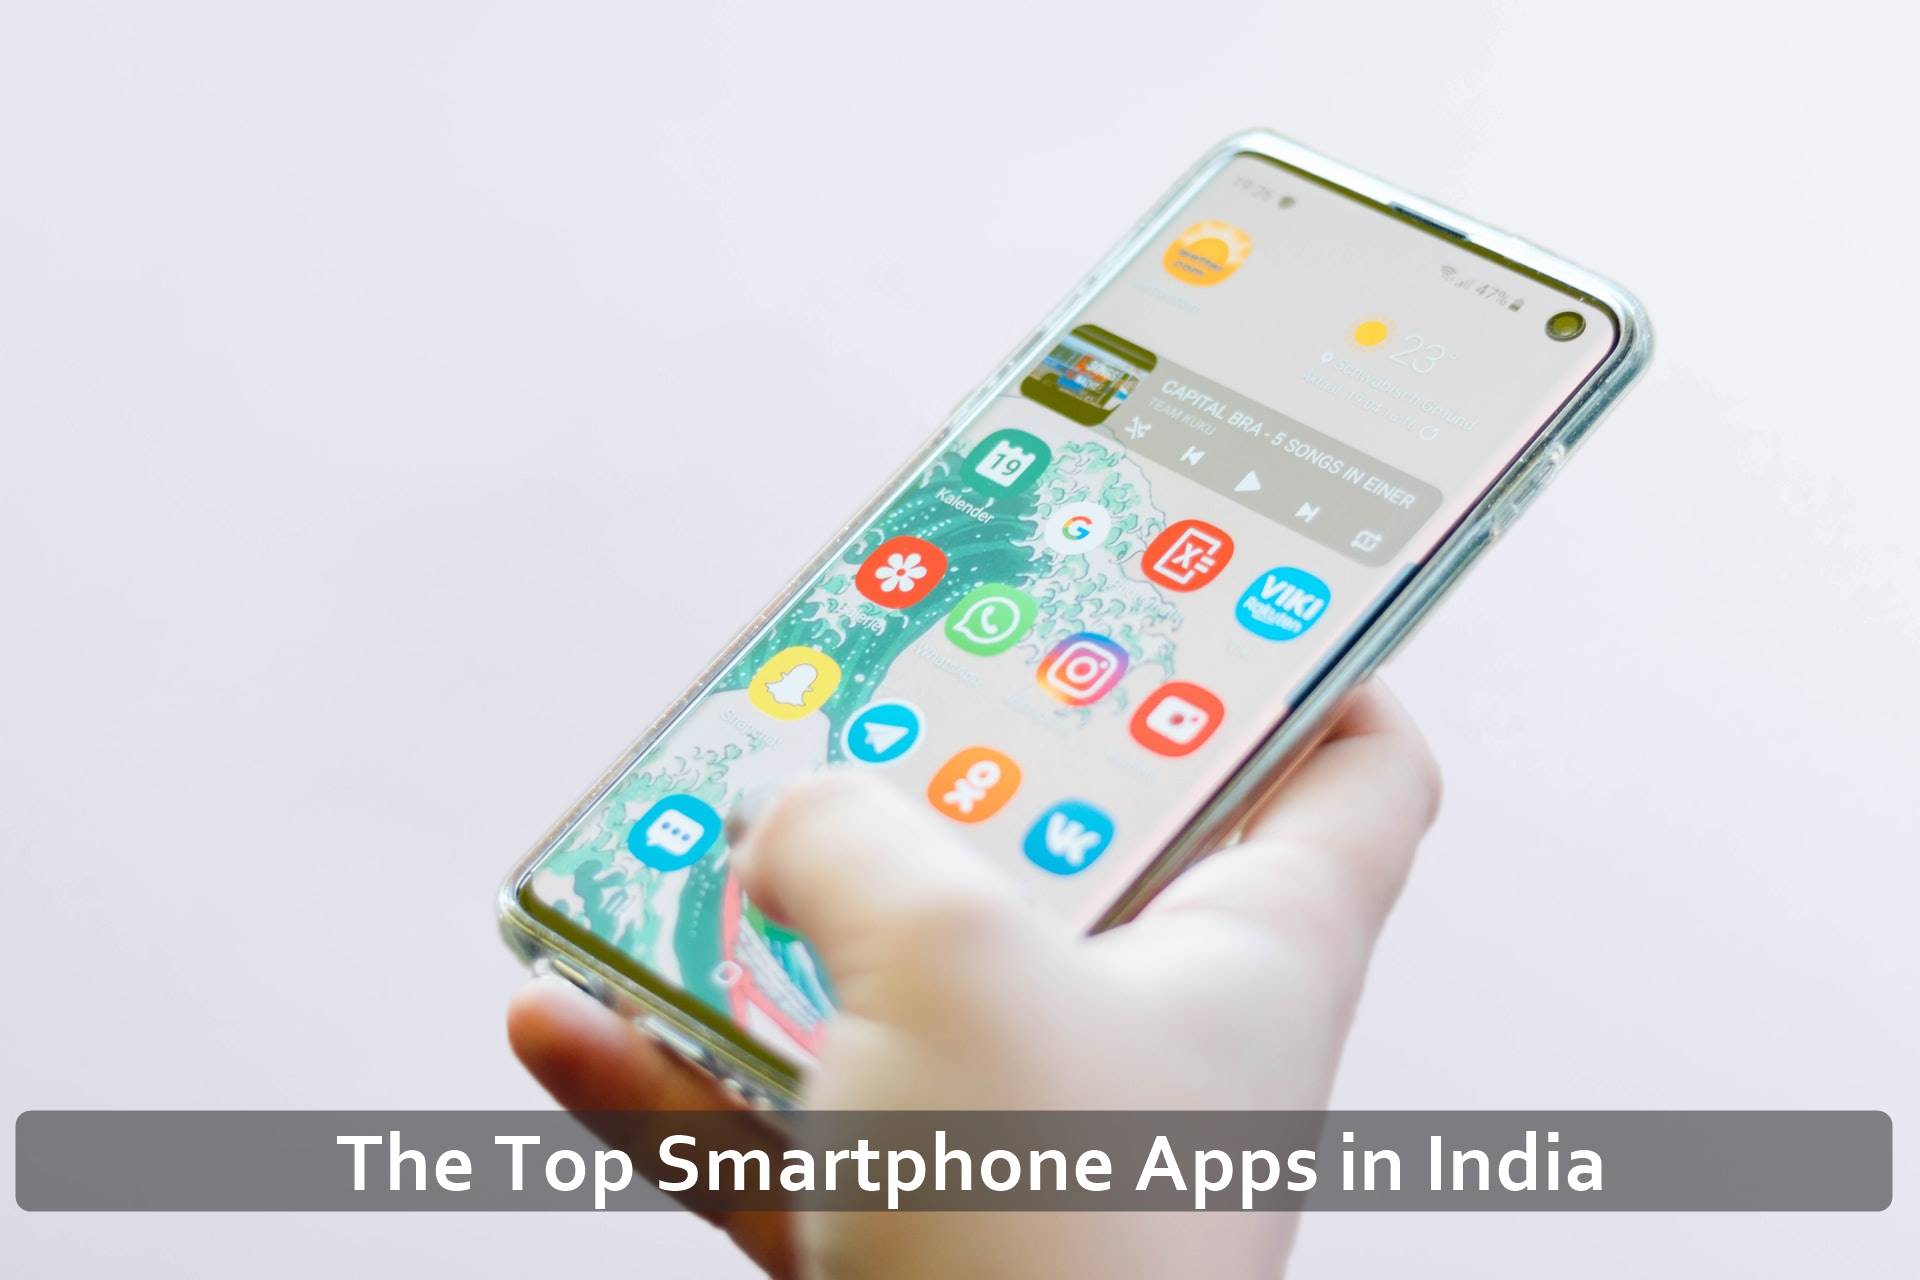 The Top Smartphone Apps in India